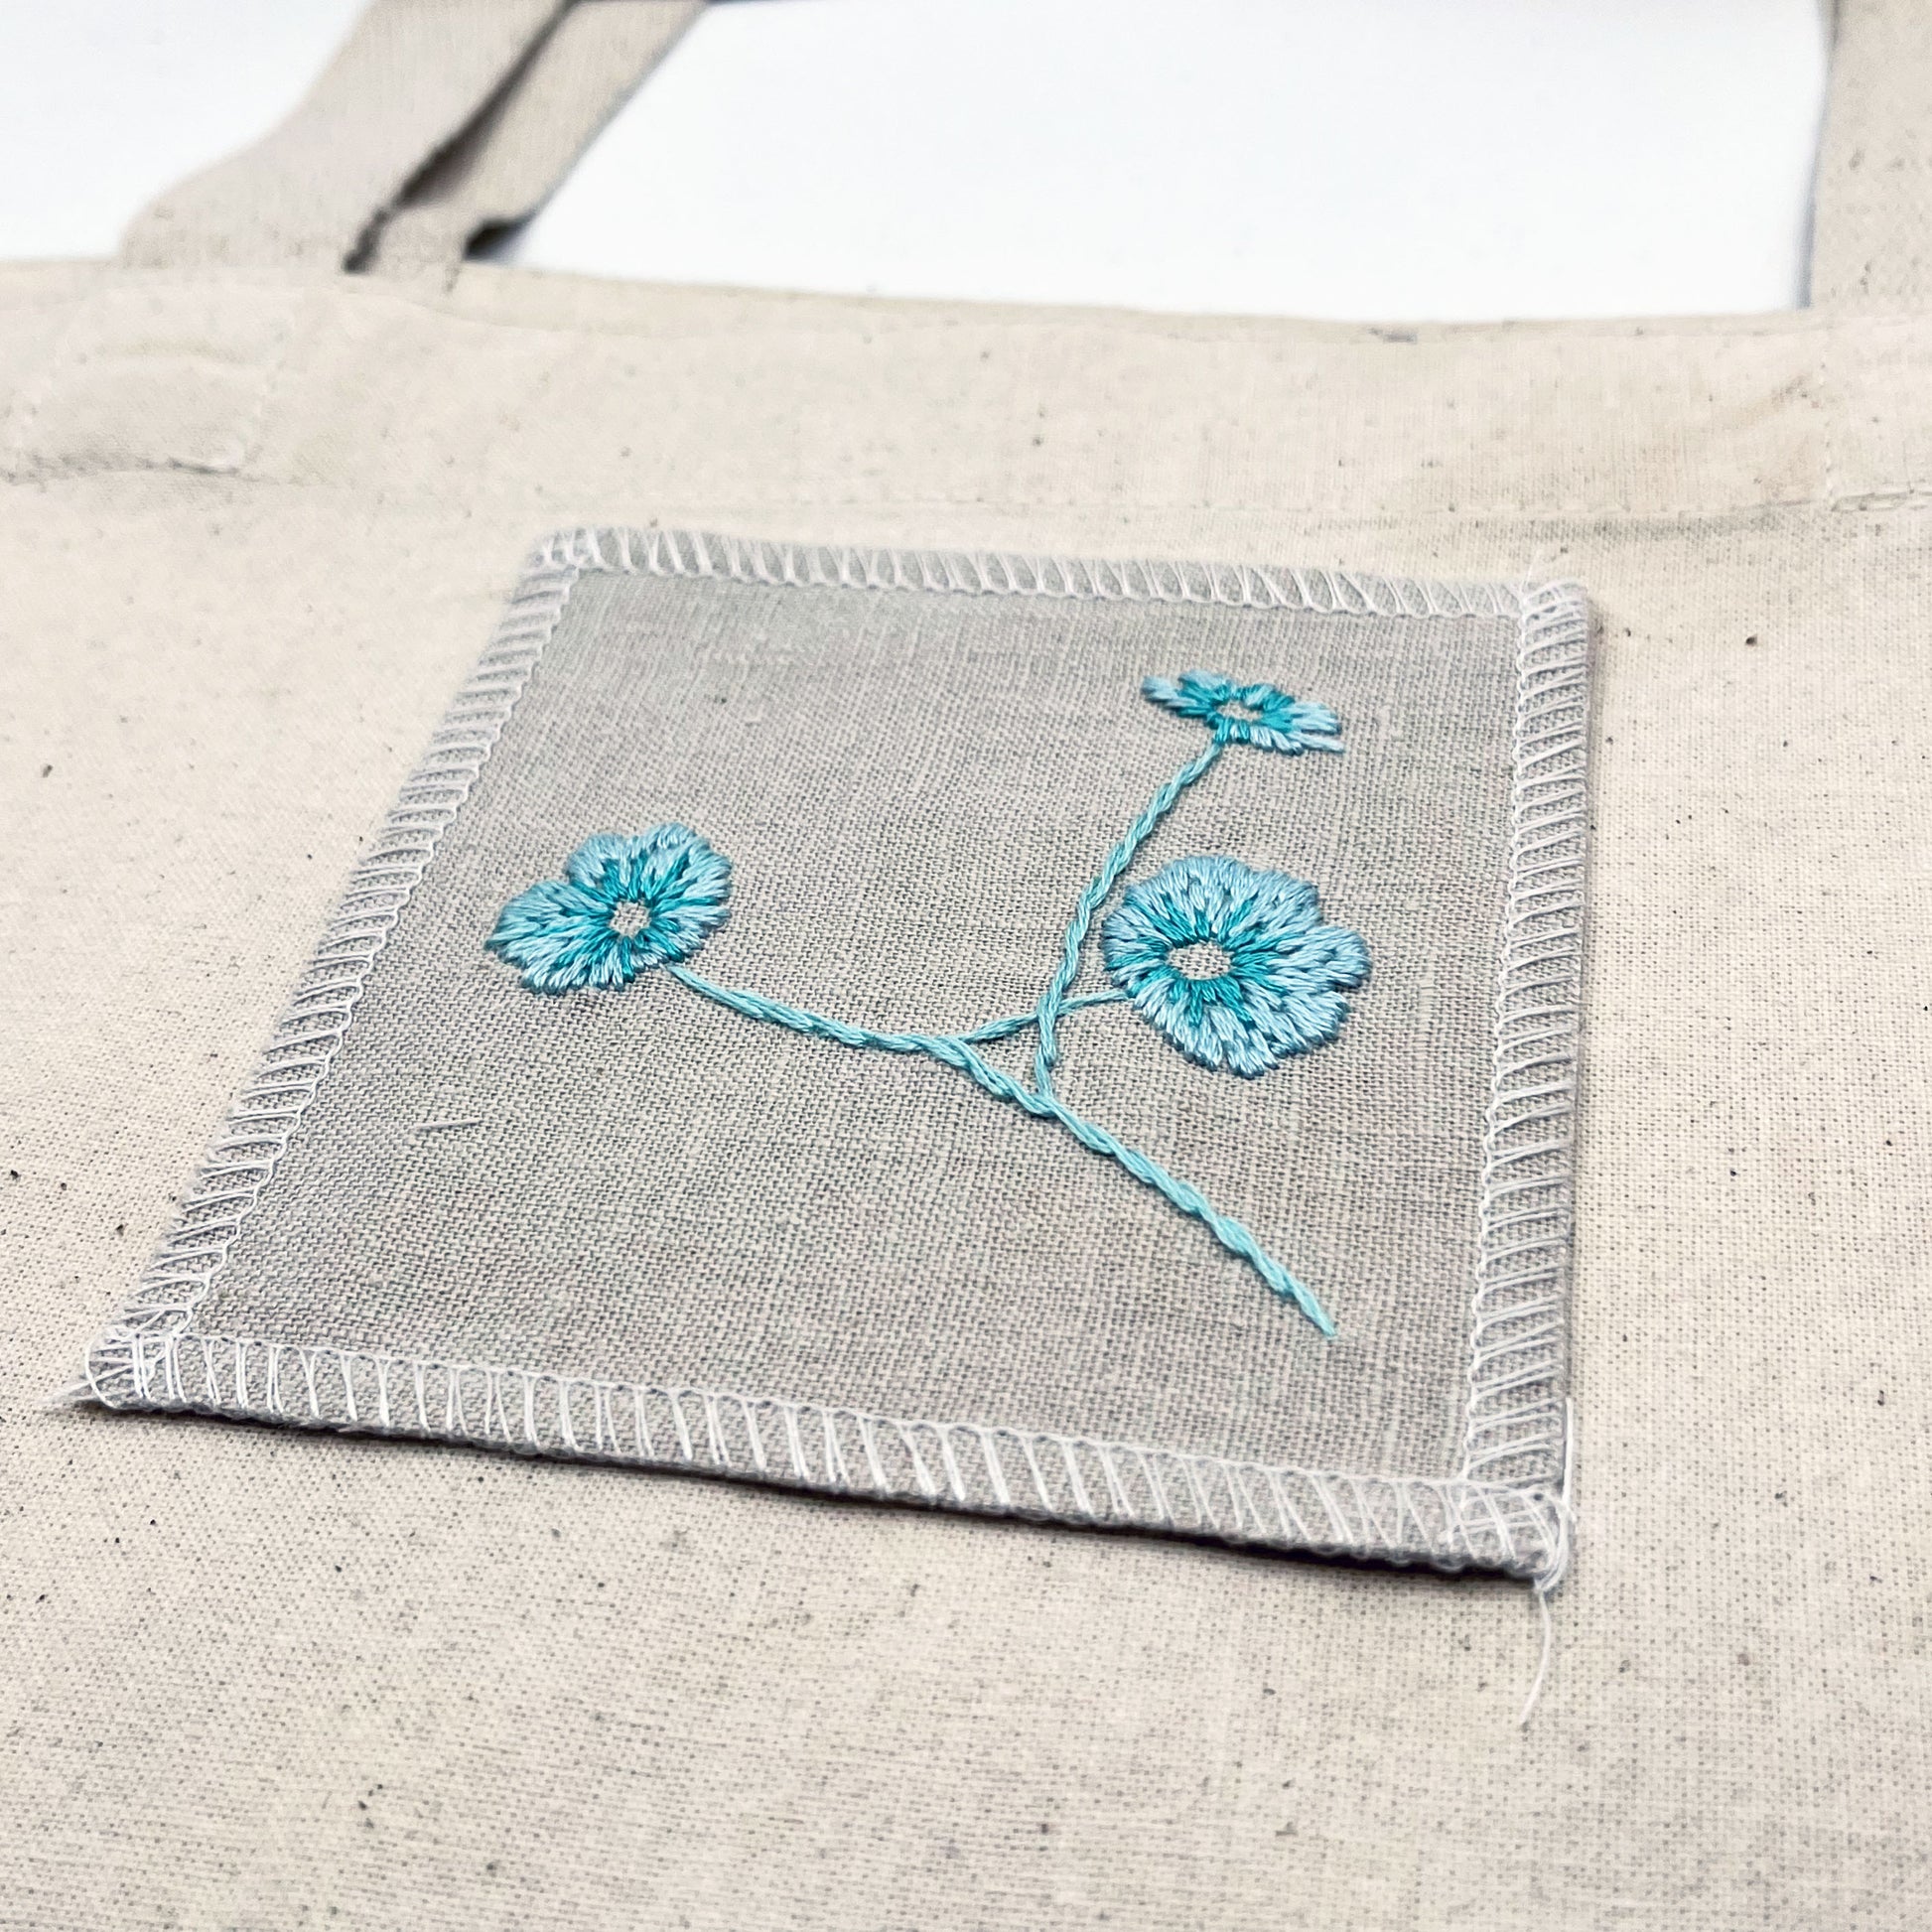 a natural colored square patch, hand embroidered with three poppies on a stem, in shades of robin's egg blue, on a natural canvas tote bag, with overlocked edges